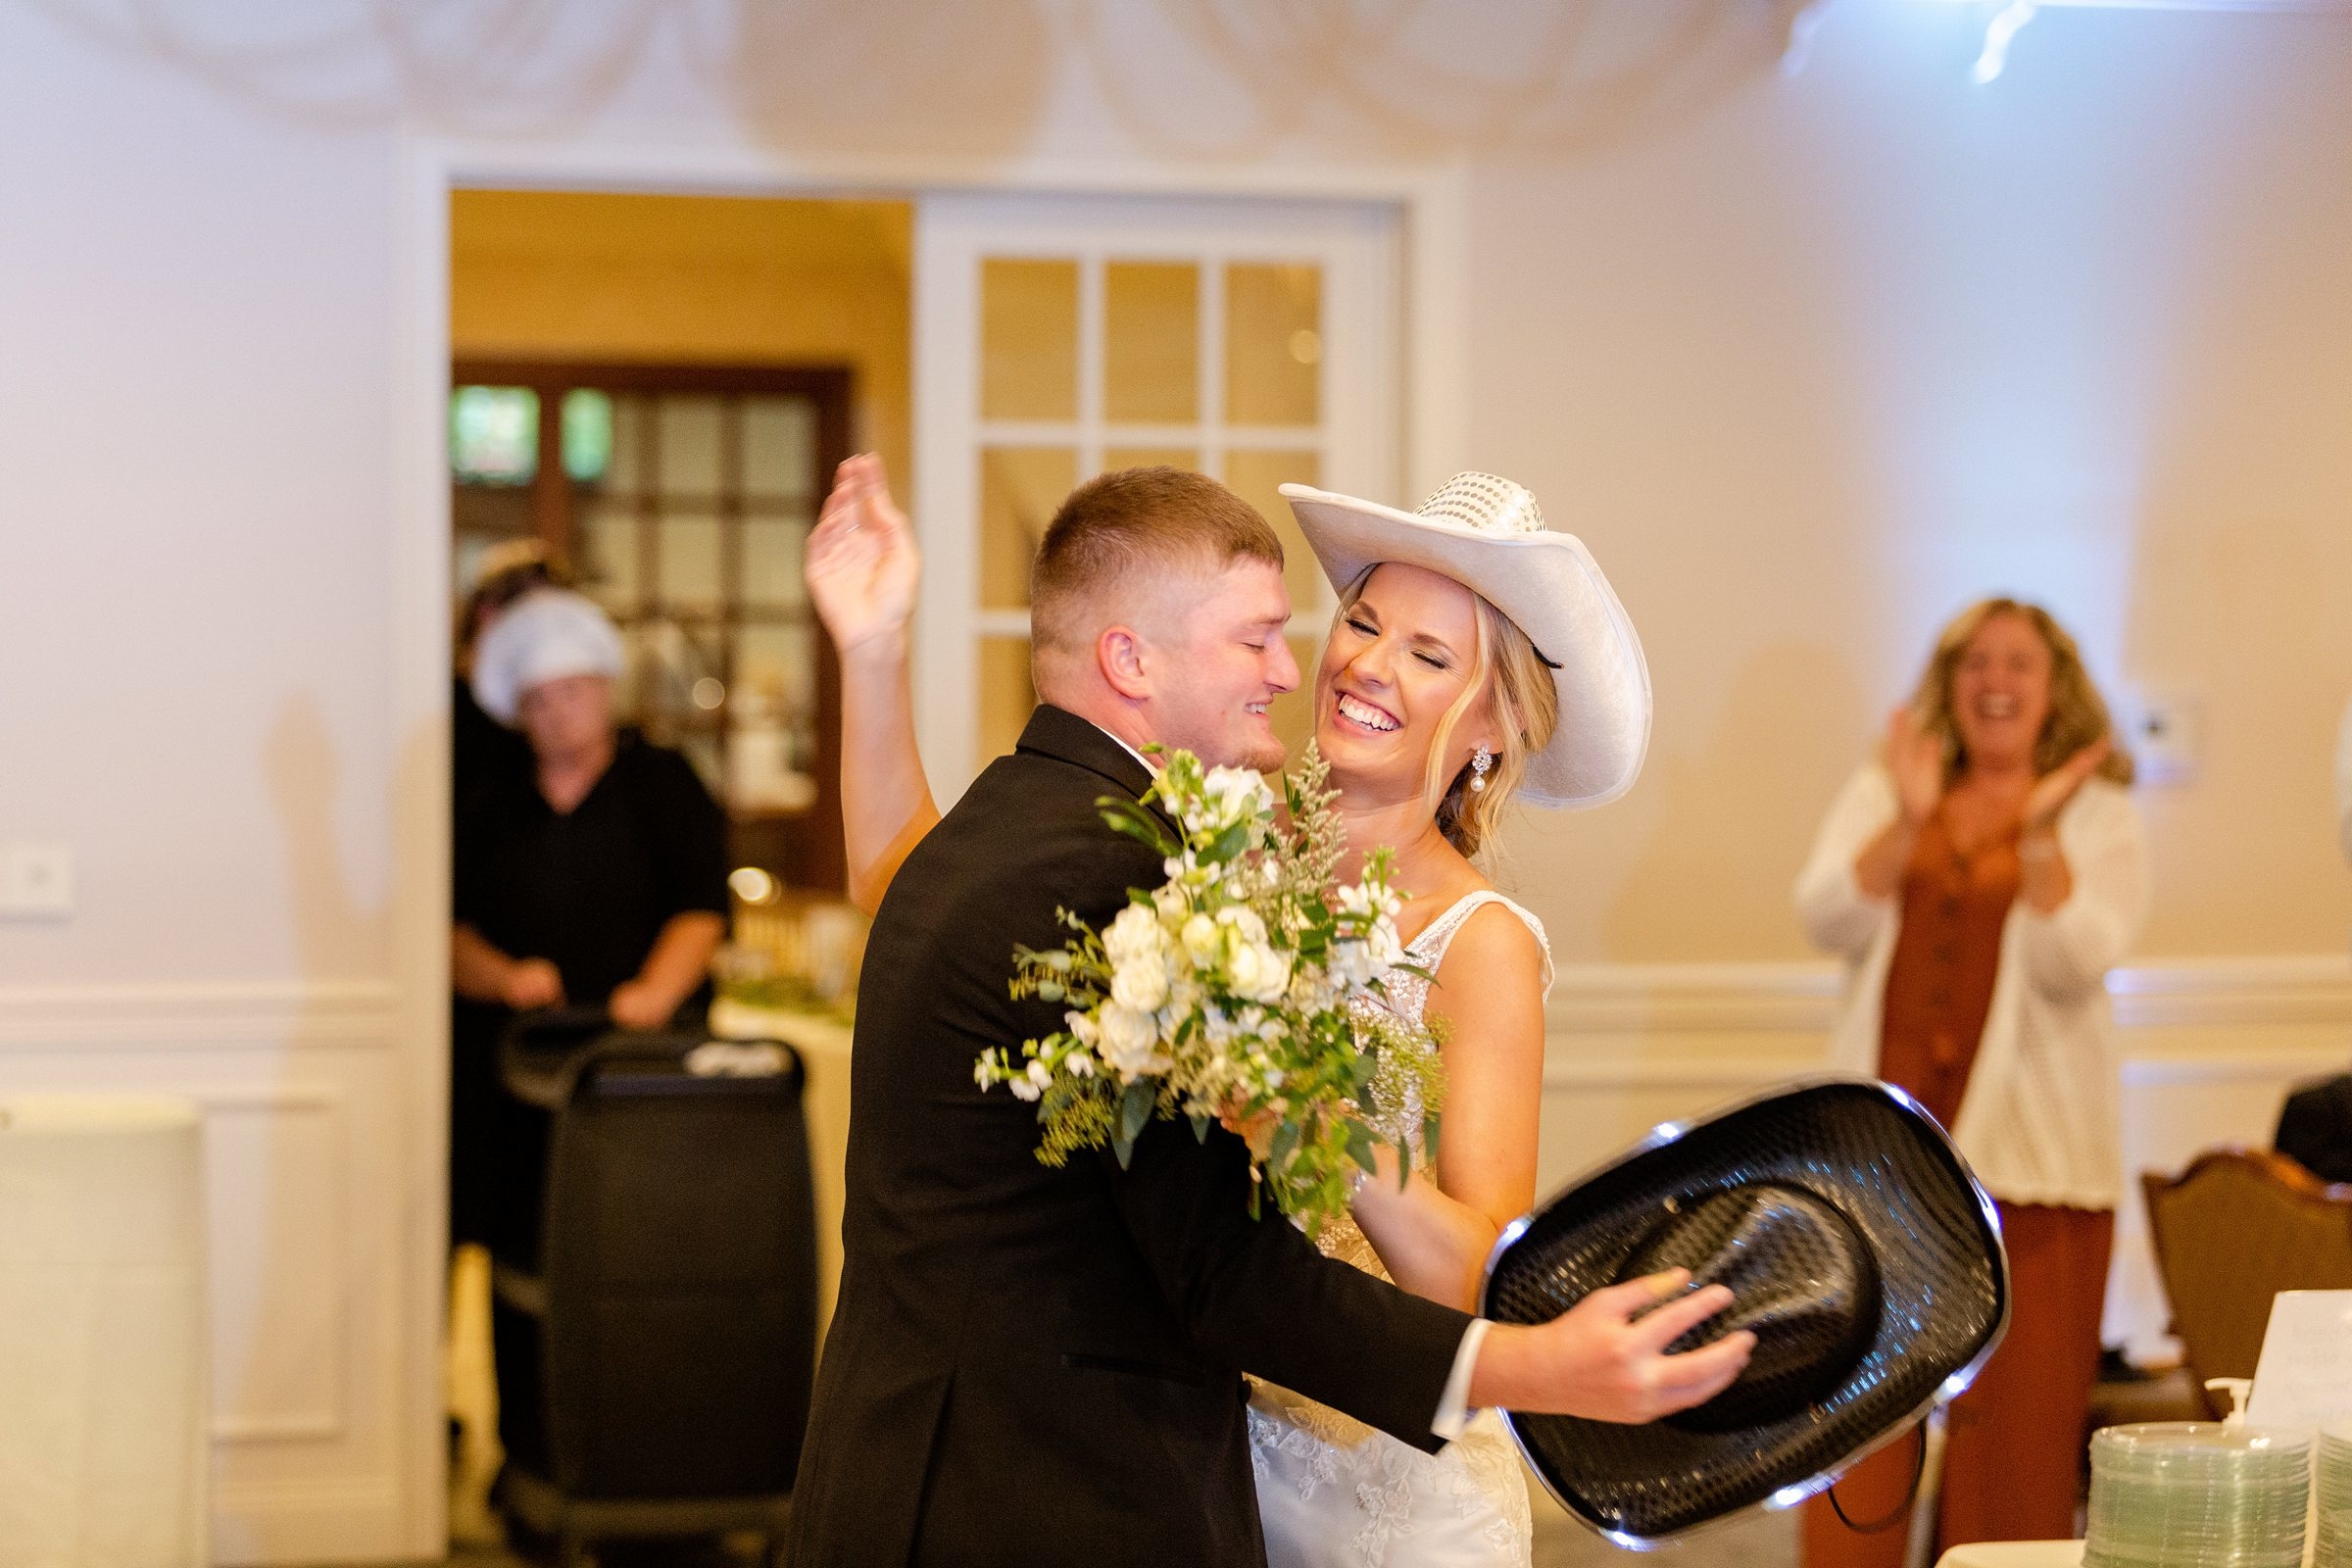 Hannah and Cody's Wedding in Booneville, IN175.jpg